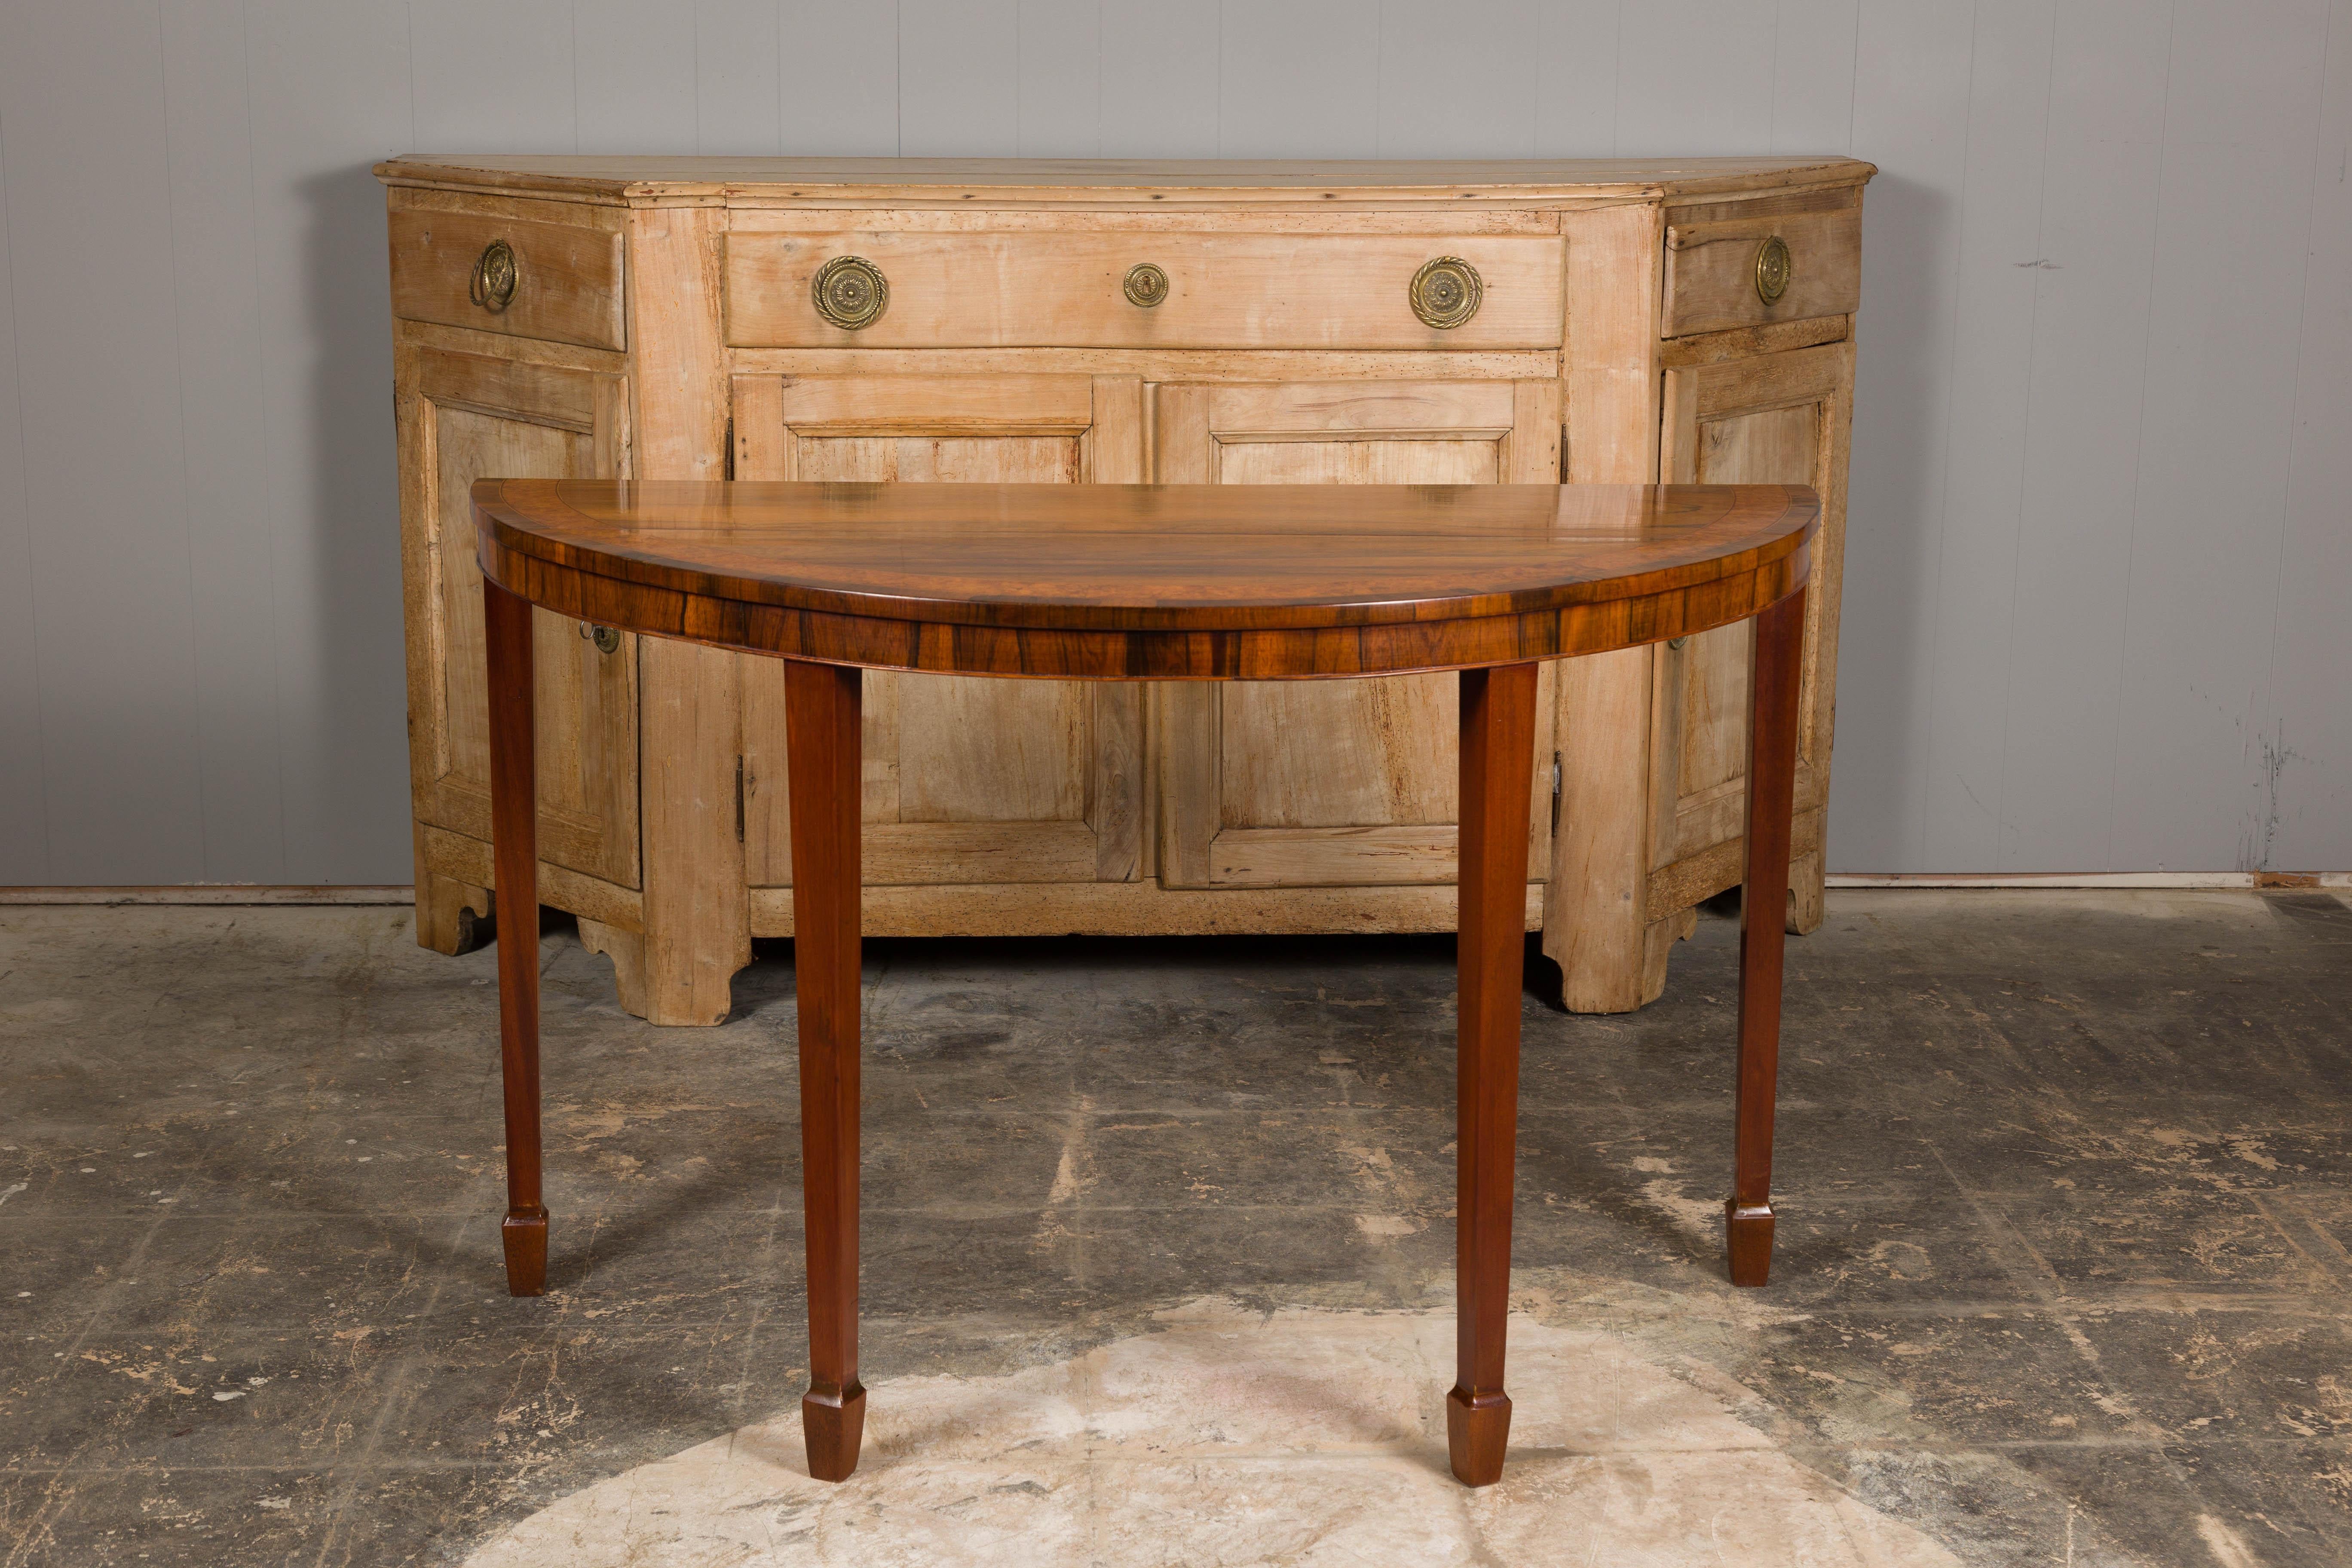 English 19th Century Mahogany Demilune Console Tables with Tapered Legs, a Pair In Good Condition For Sale In Atlanta, GA